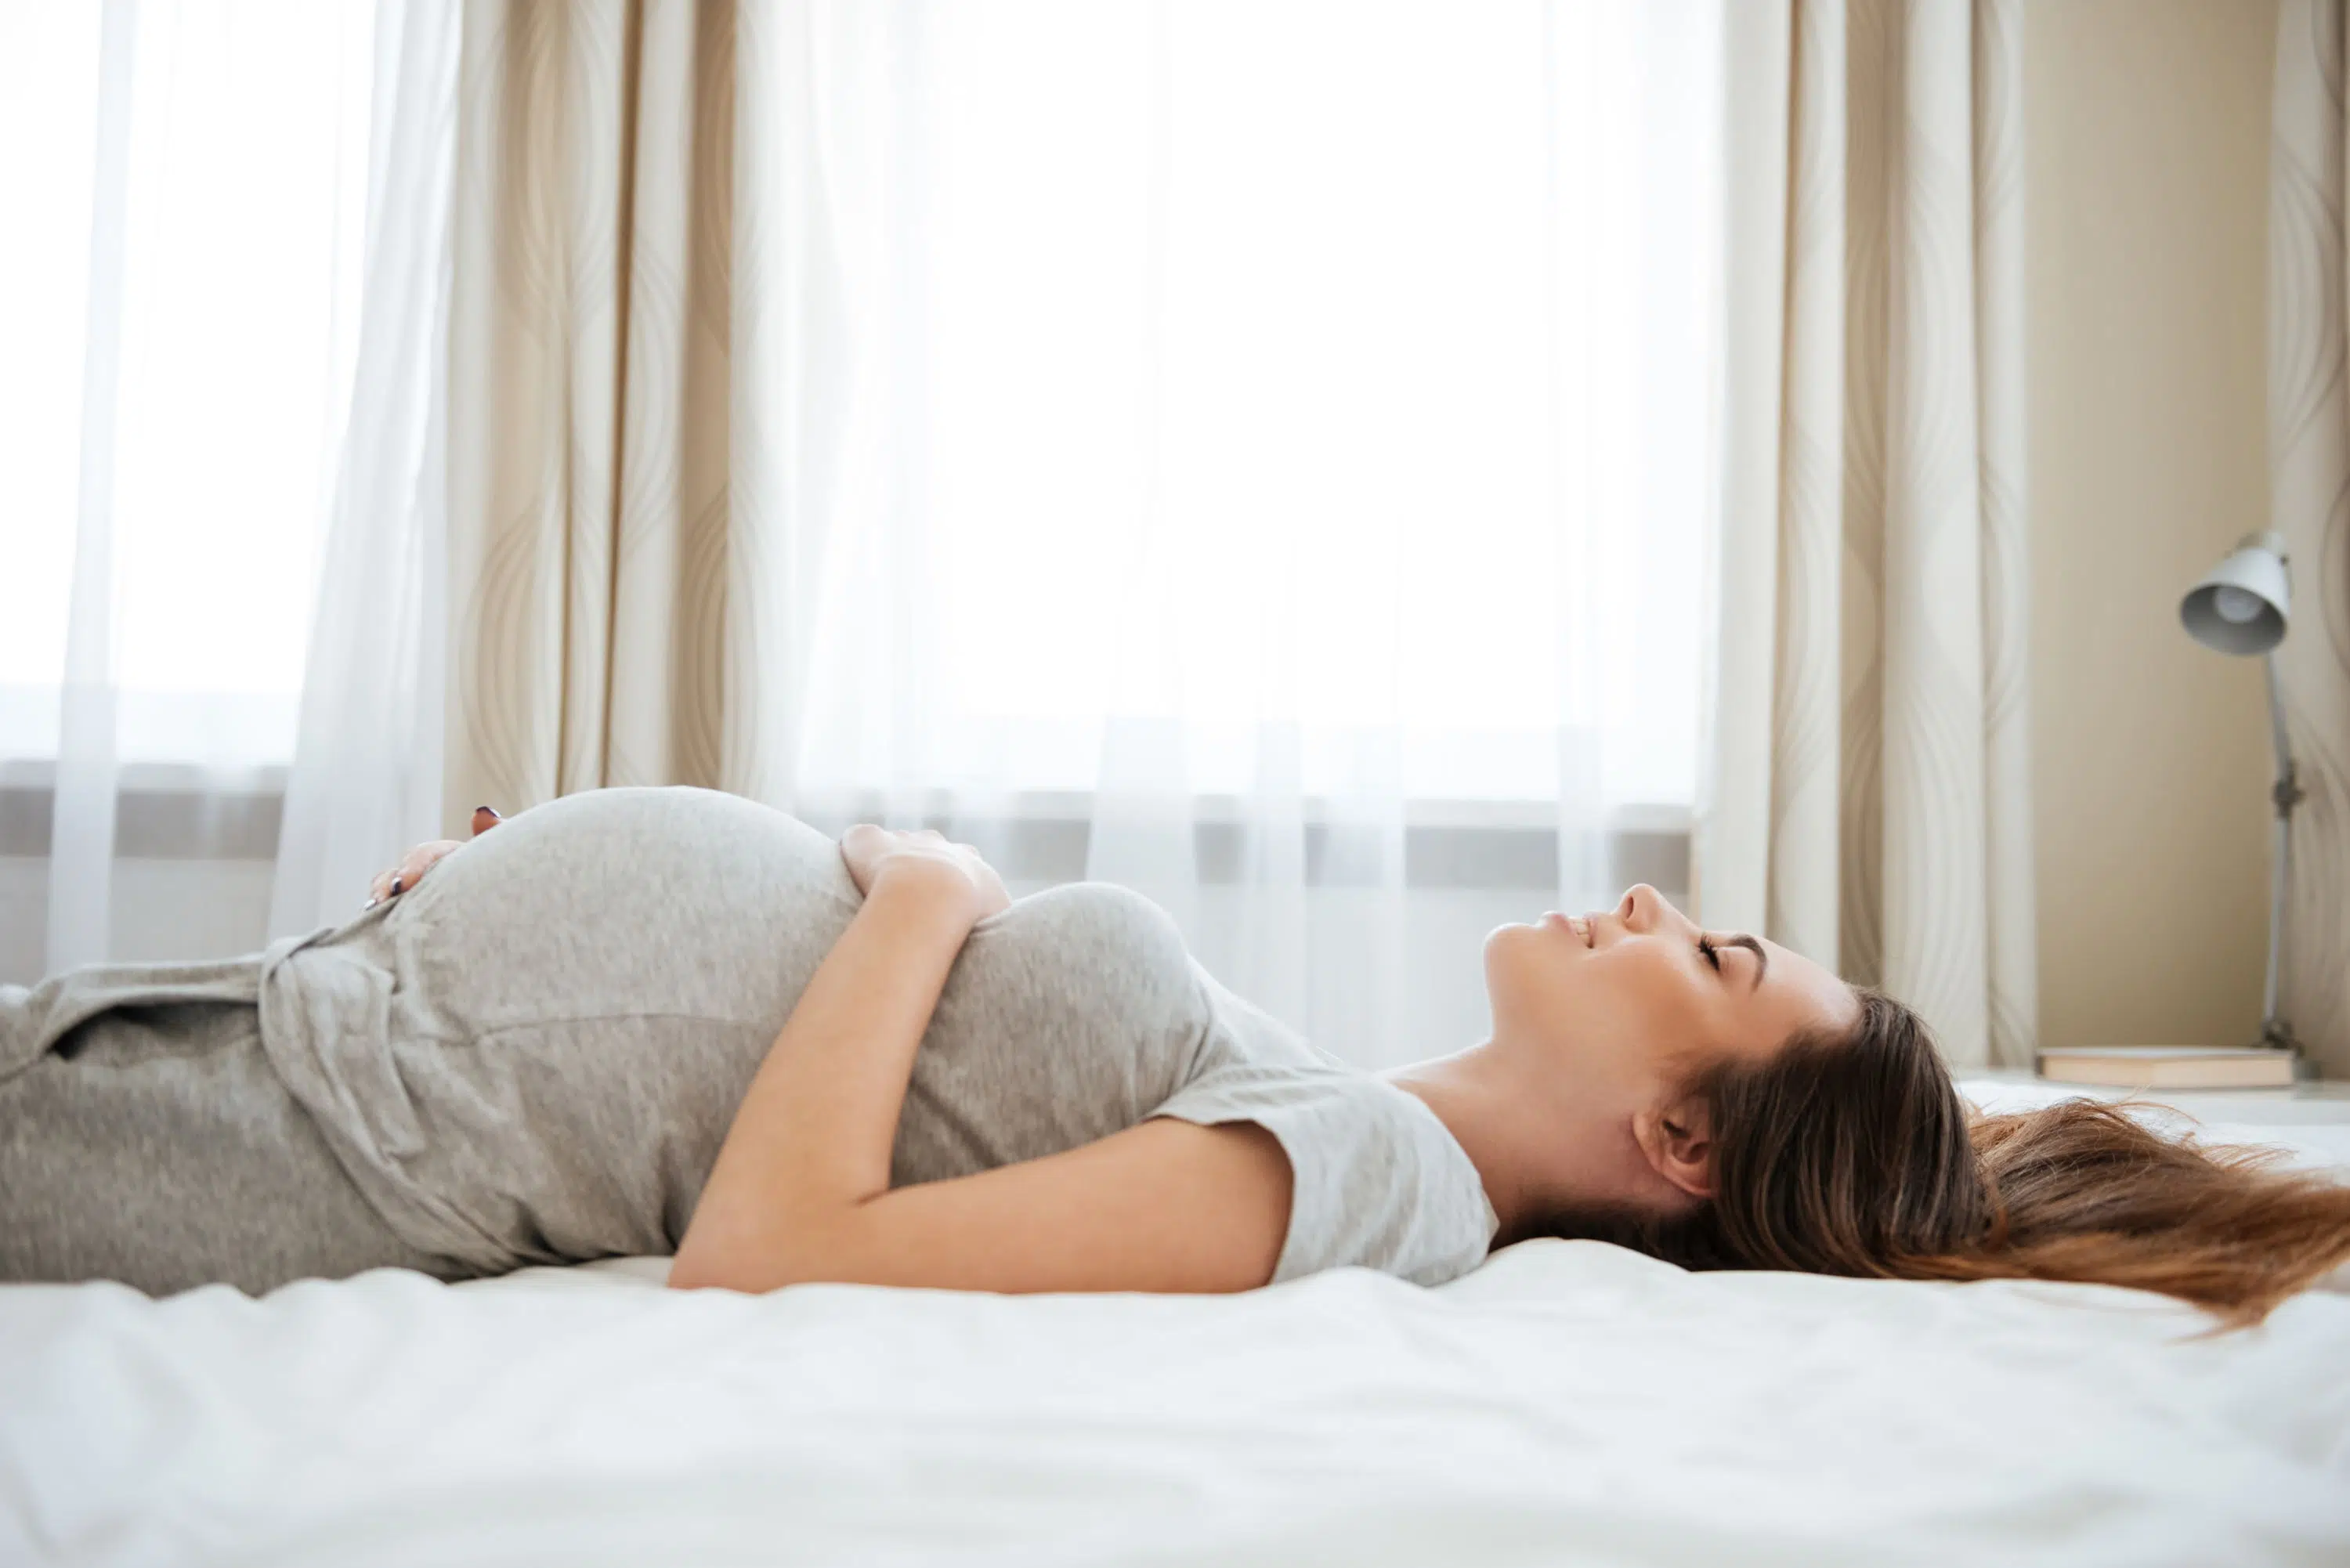 Pregnant woman relaxes on bed scaled